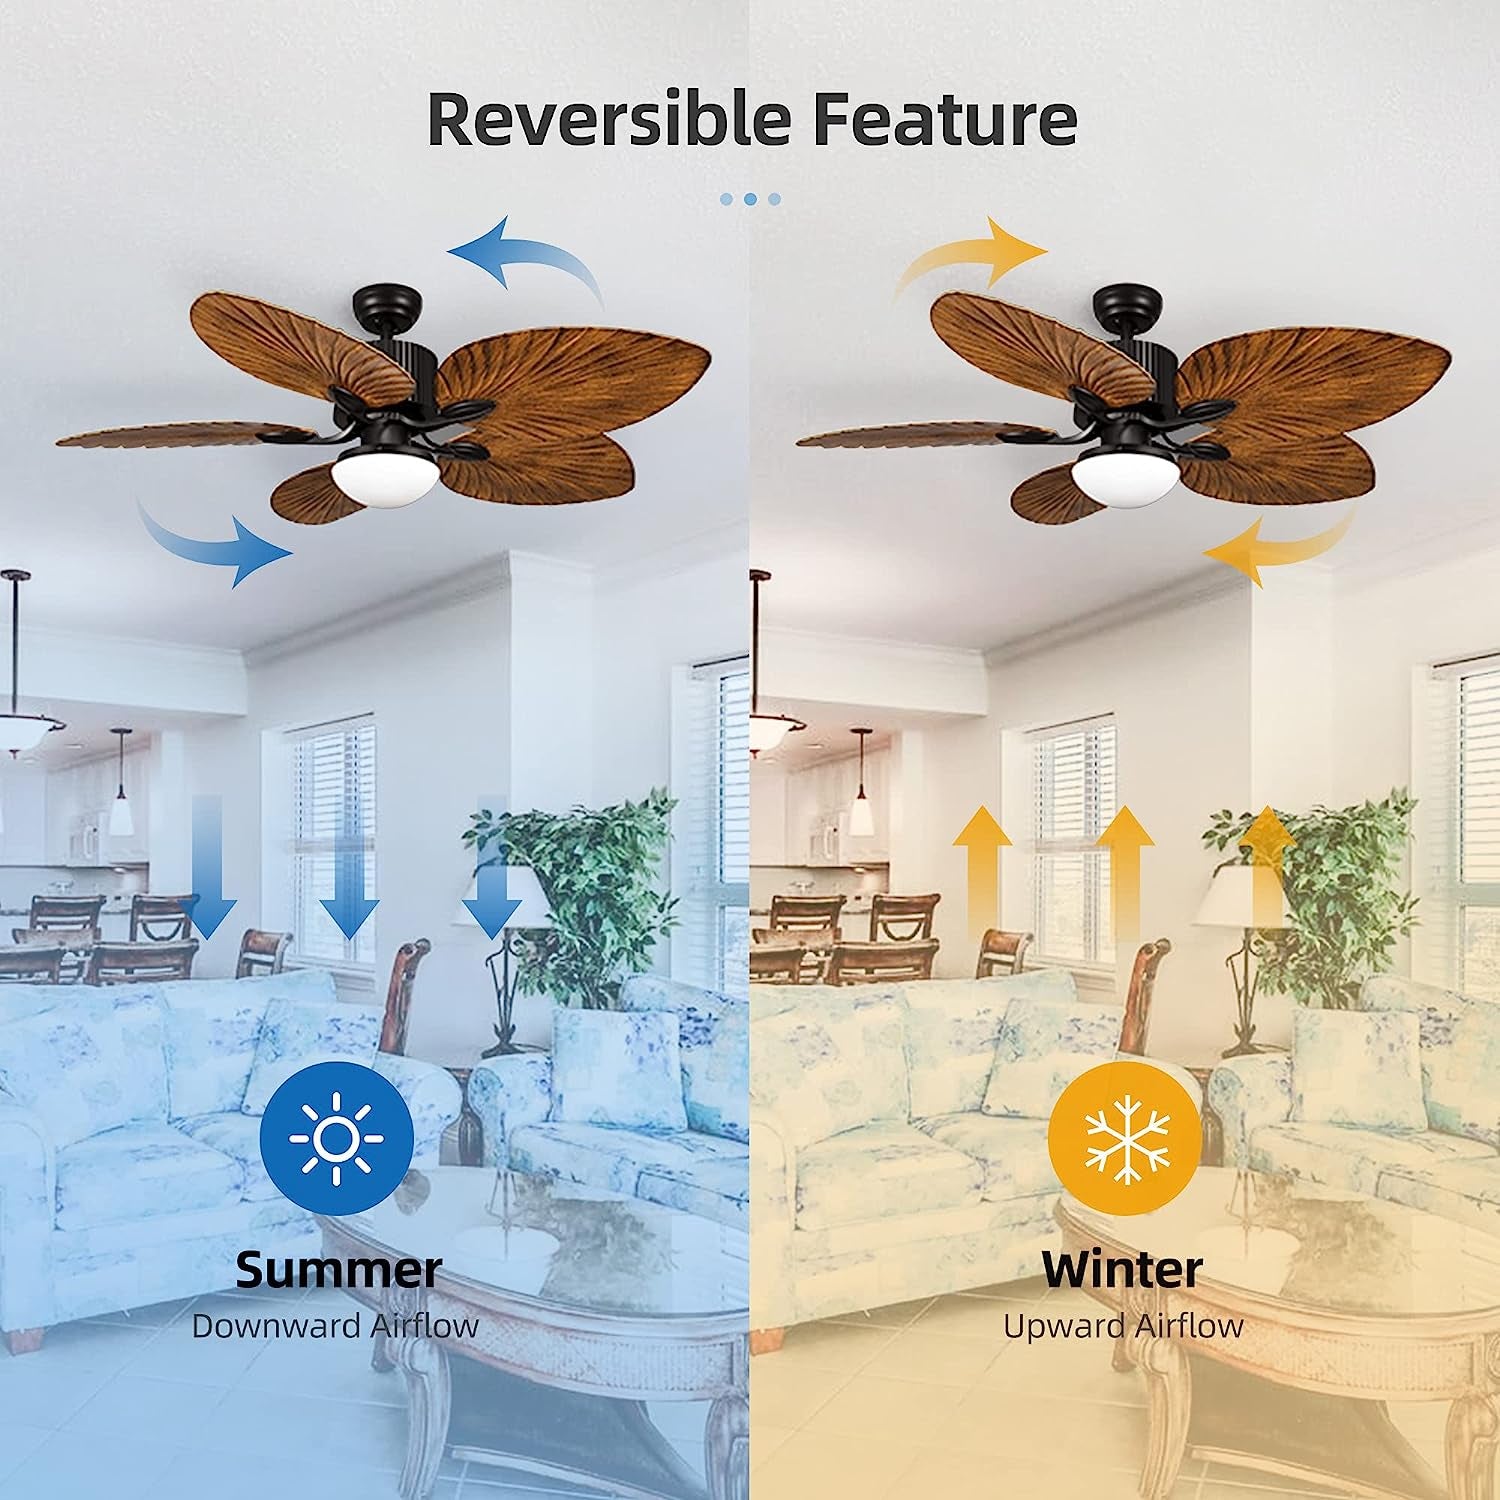 Tropical Ceiling Fan with LED Light and Remote Control 52 Inch Palm Reversible Fan Light with Memory Function 5 Leaf Blades and Balance Clips - Black